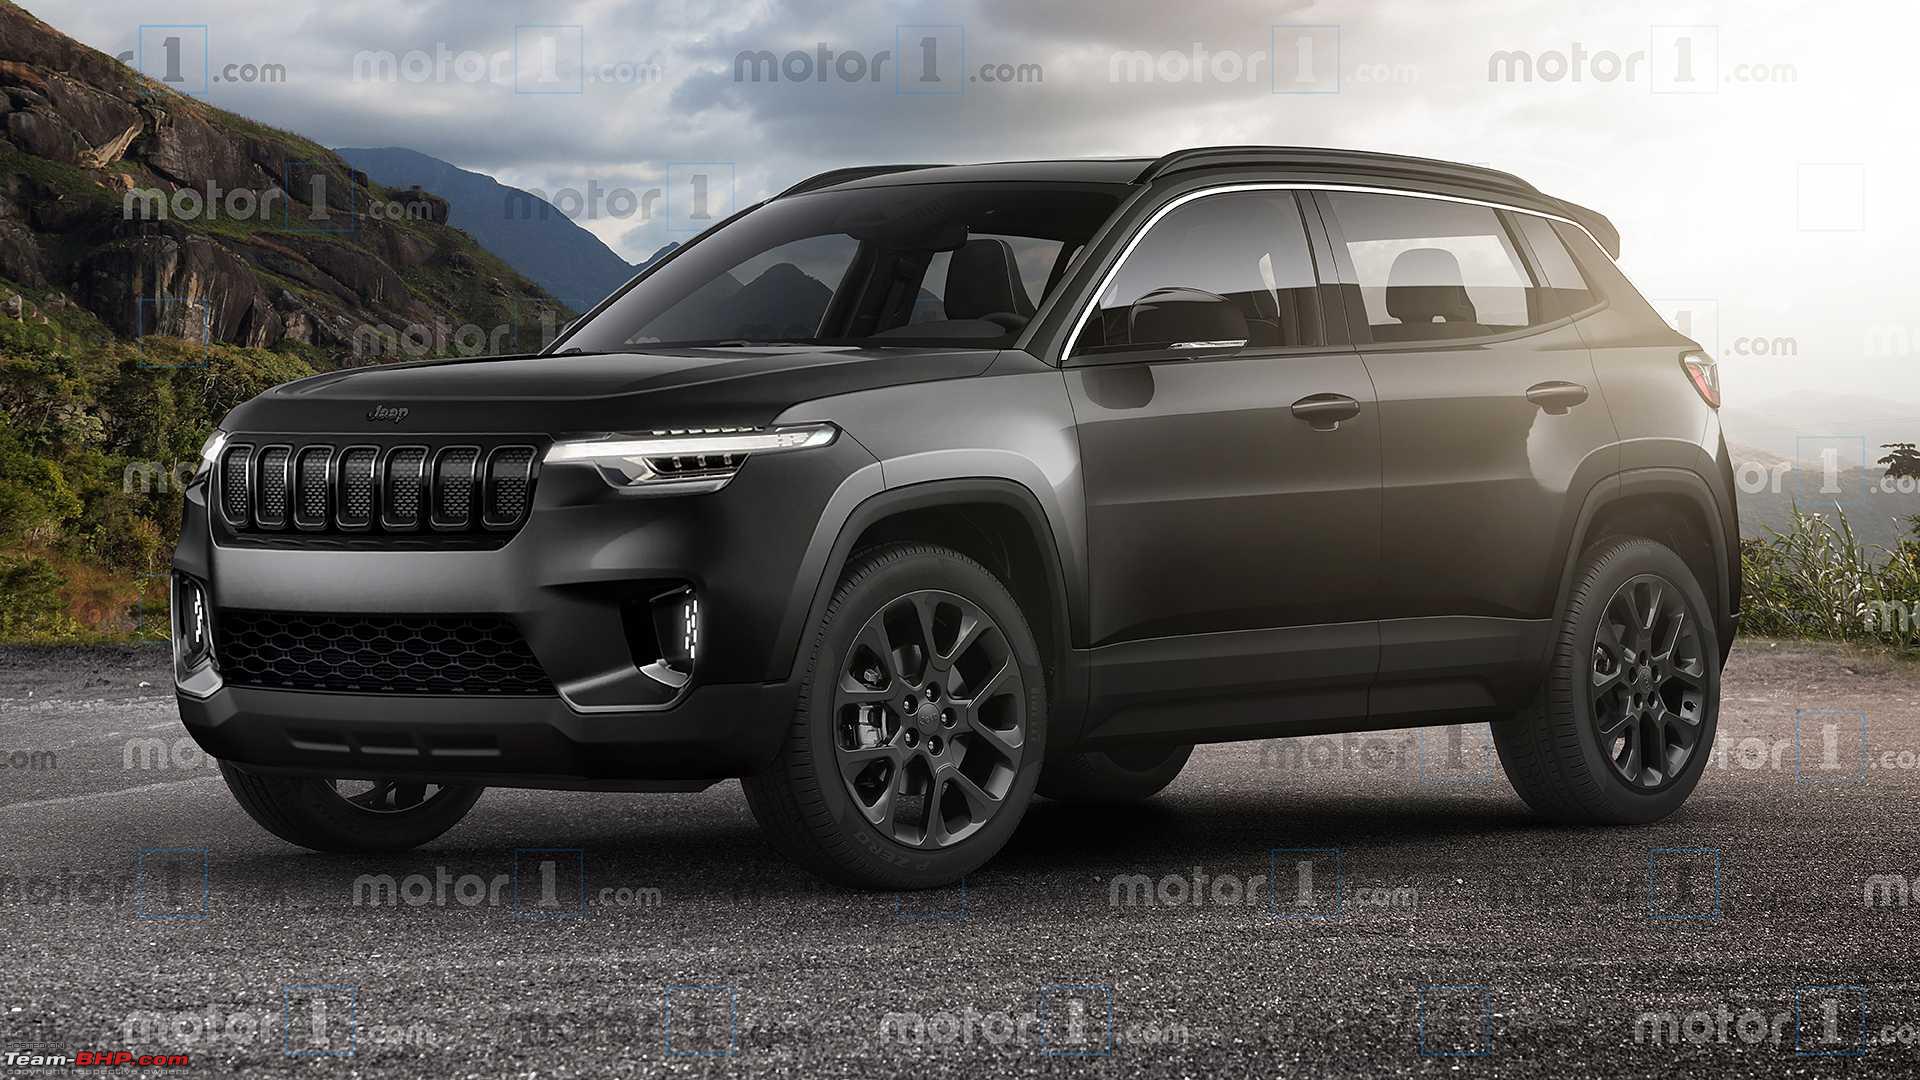 Jeep BSegment Compact SUV Here are more details Page 6